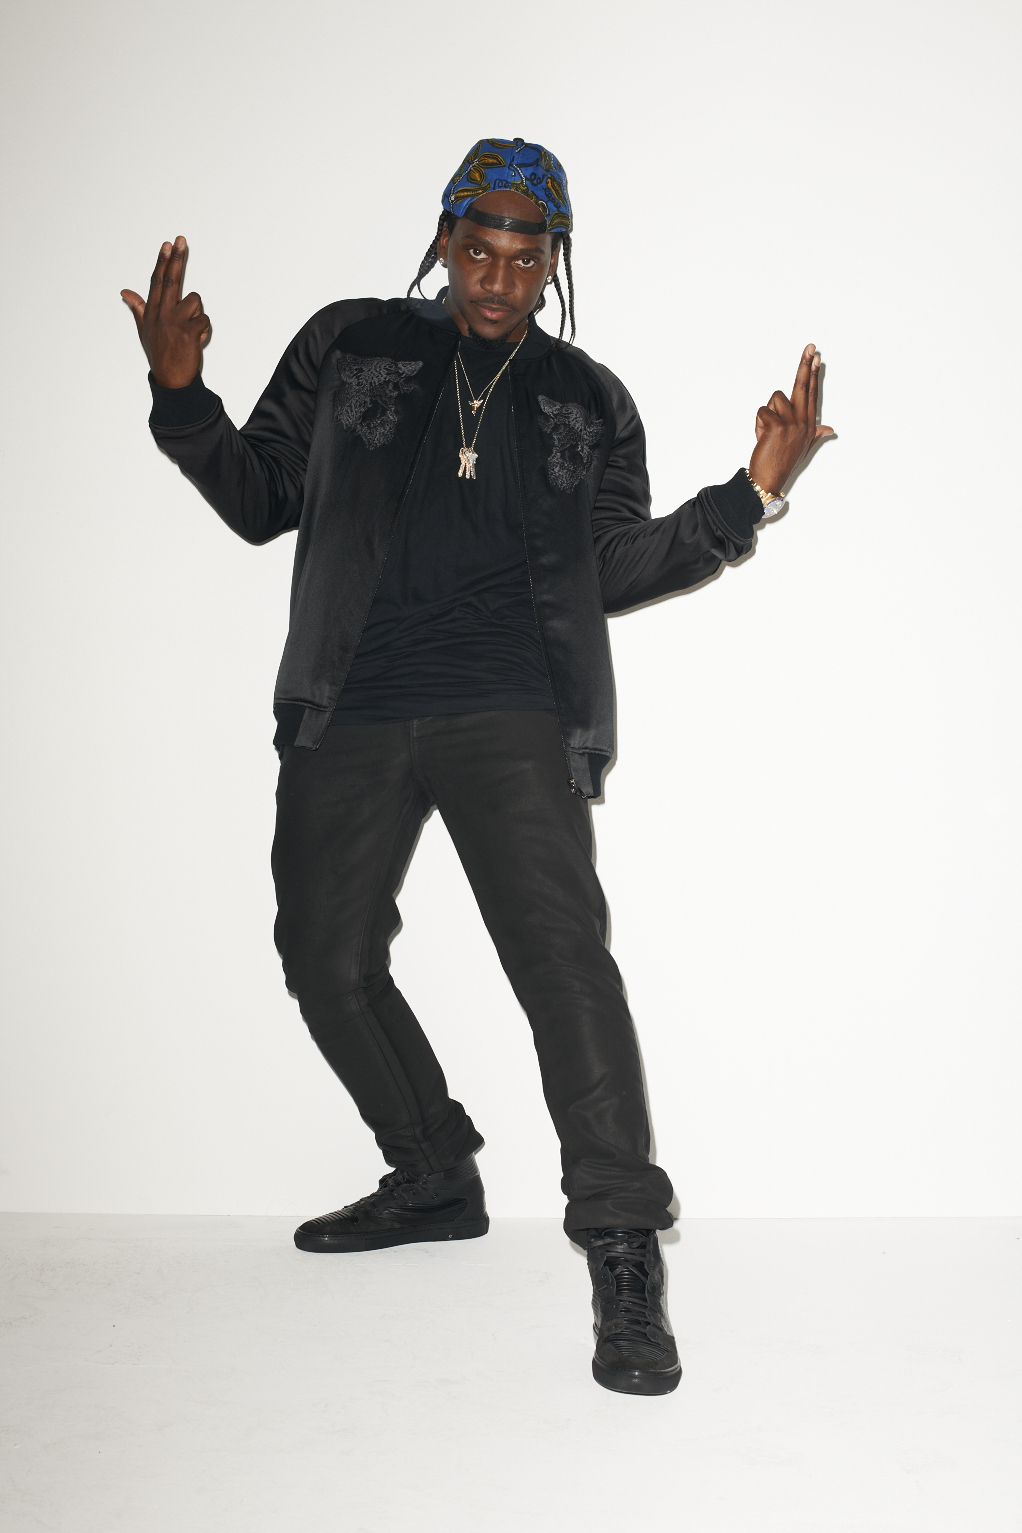 Pusha T photographed by Terry Richardson